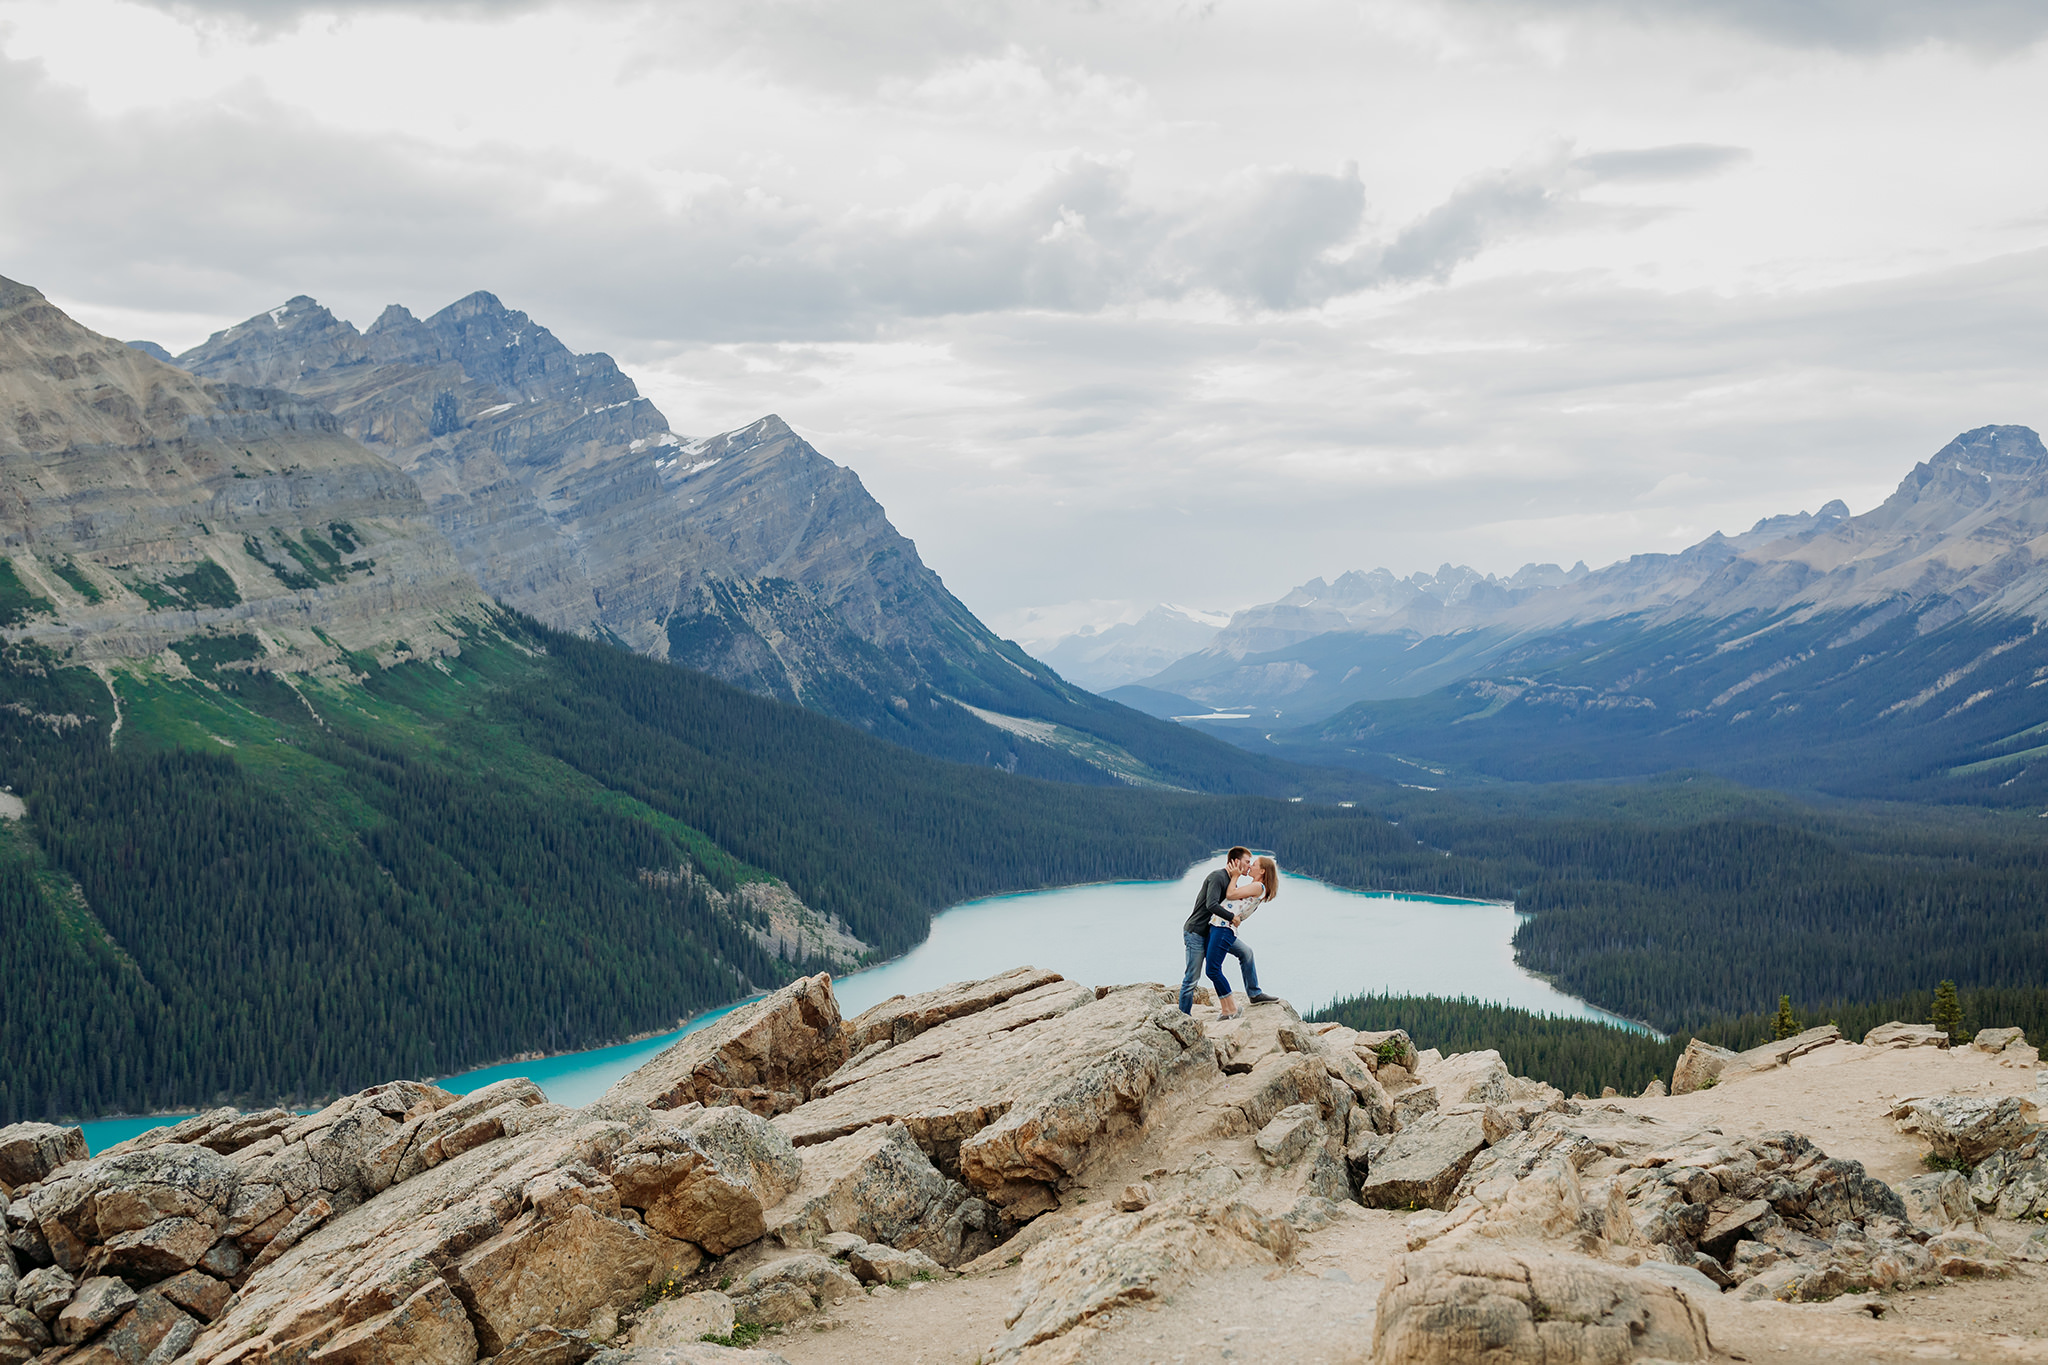 Peyto Lake casual engagement photography session at Bow Summit along Icefields Parkway in Banff National Park photographed by local engagement & elopement photographer ENV Photography